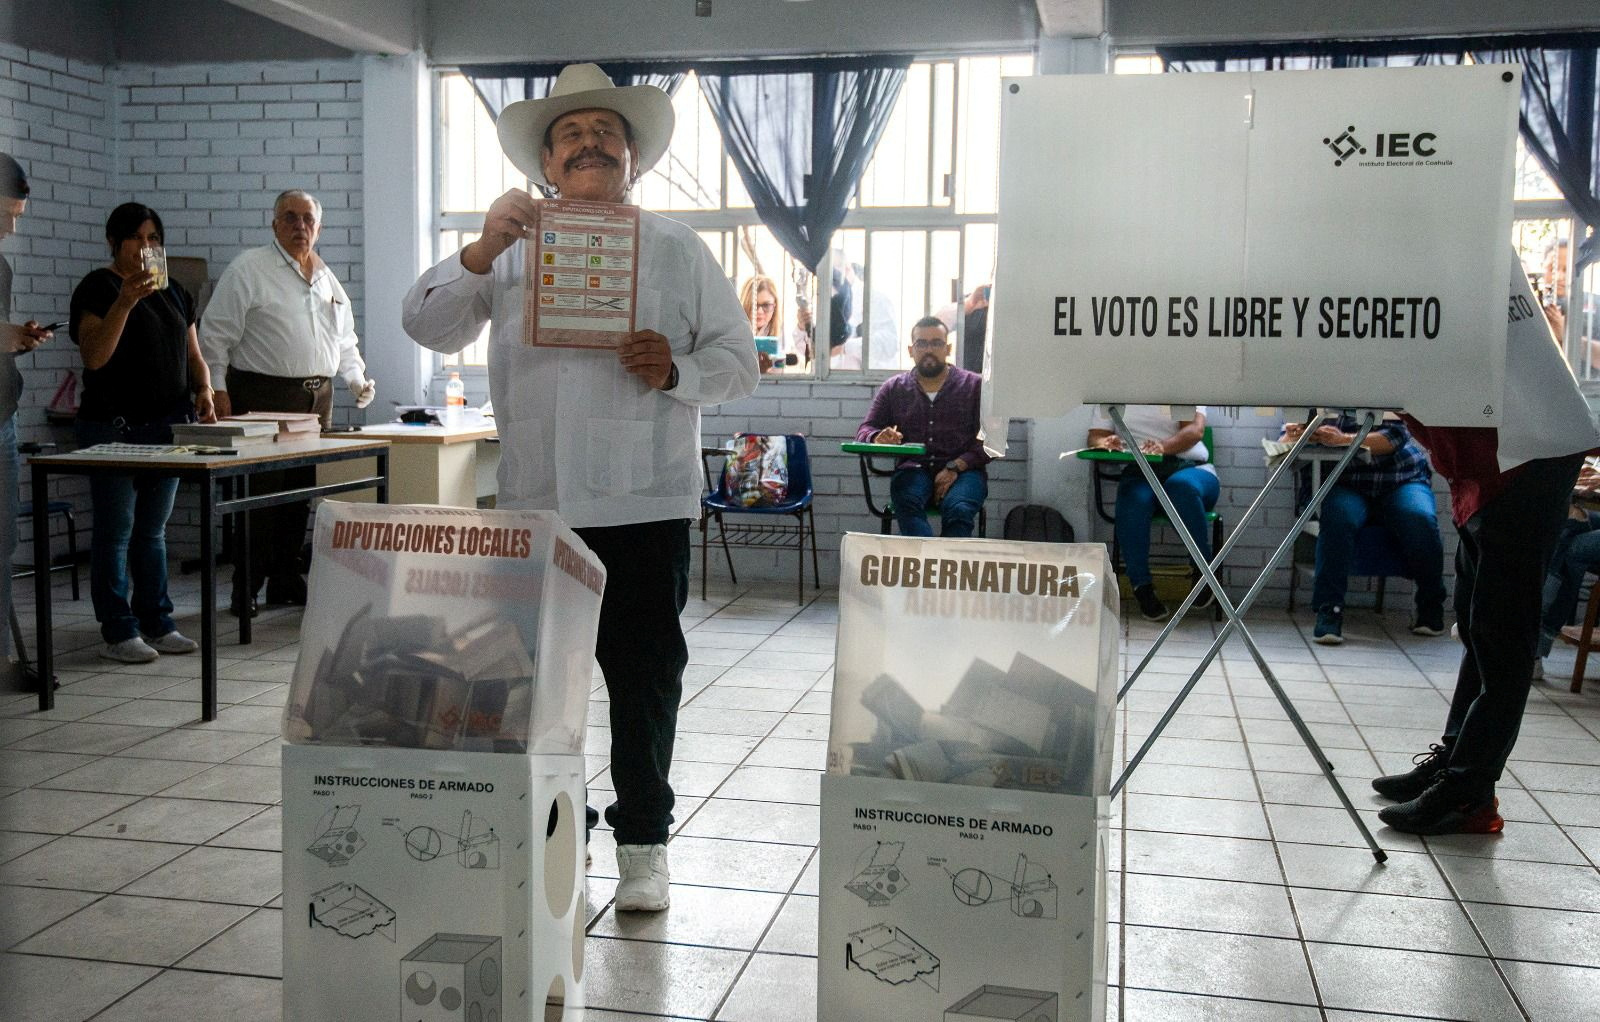 State of Mexico holds governor elections